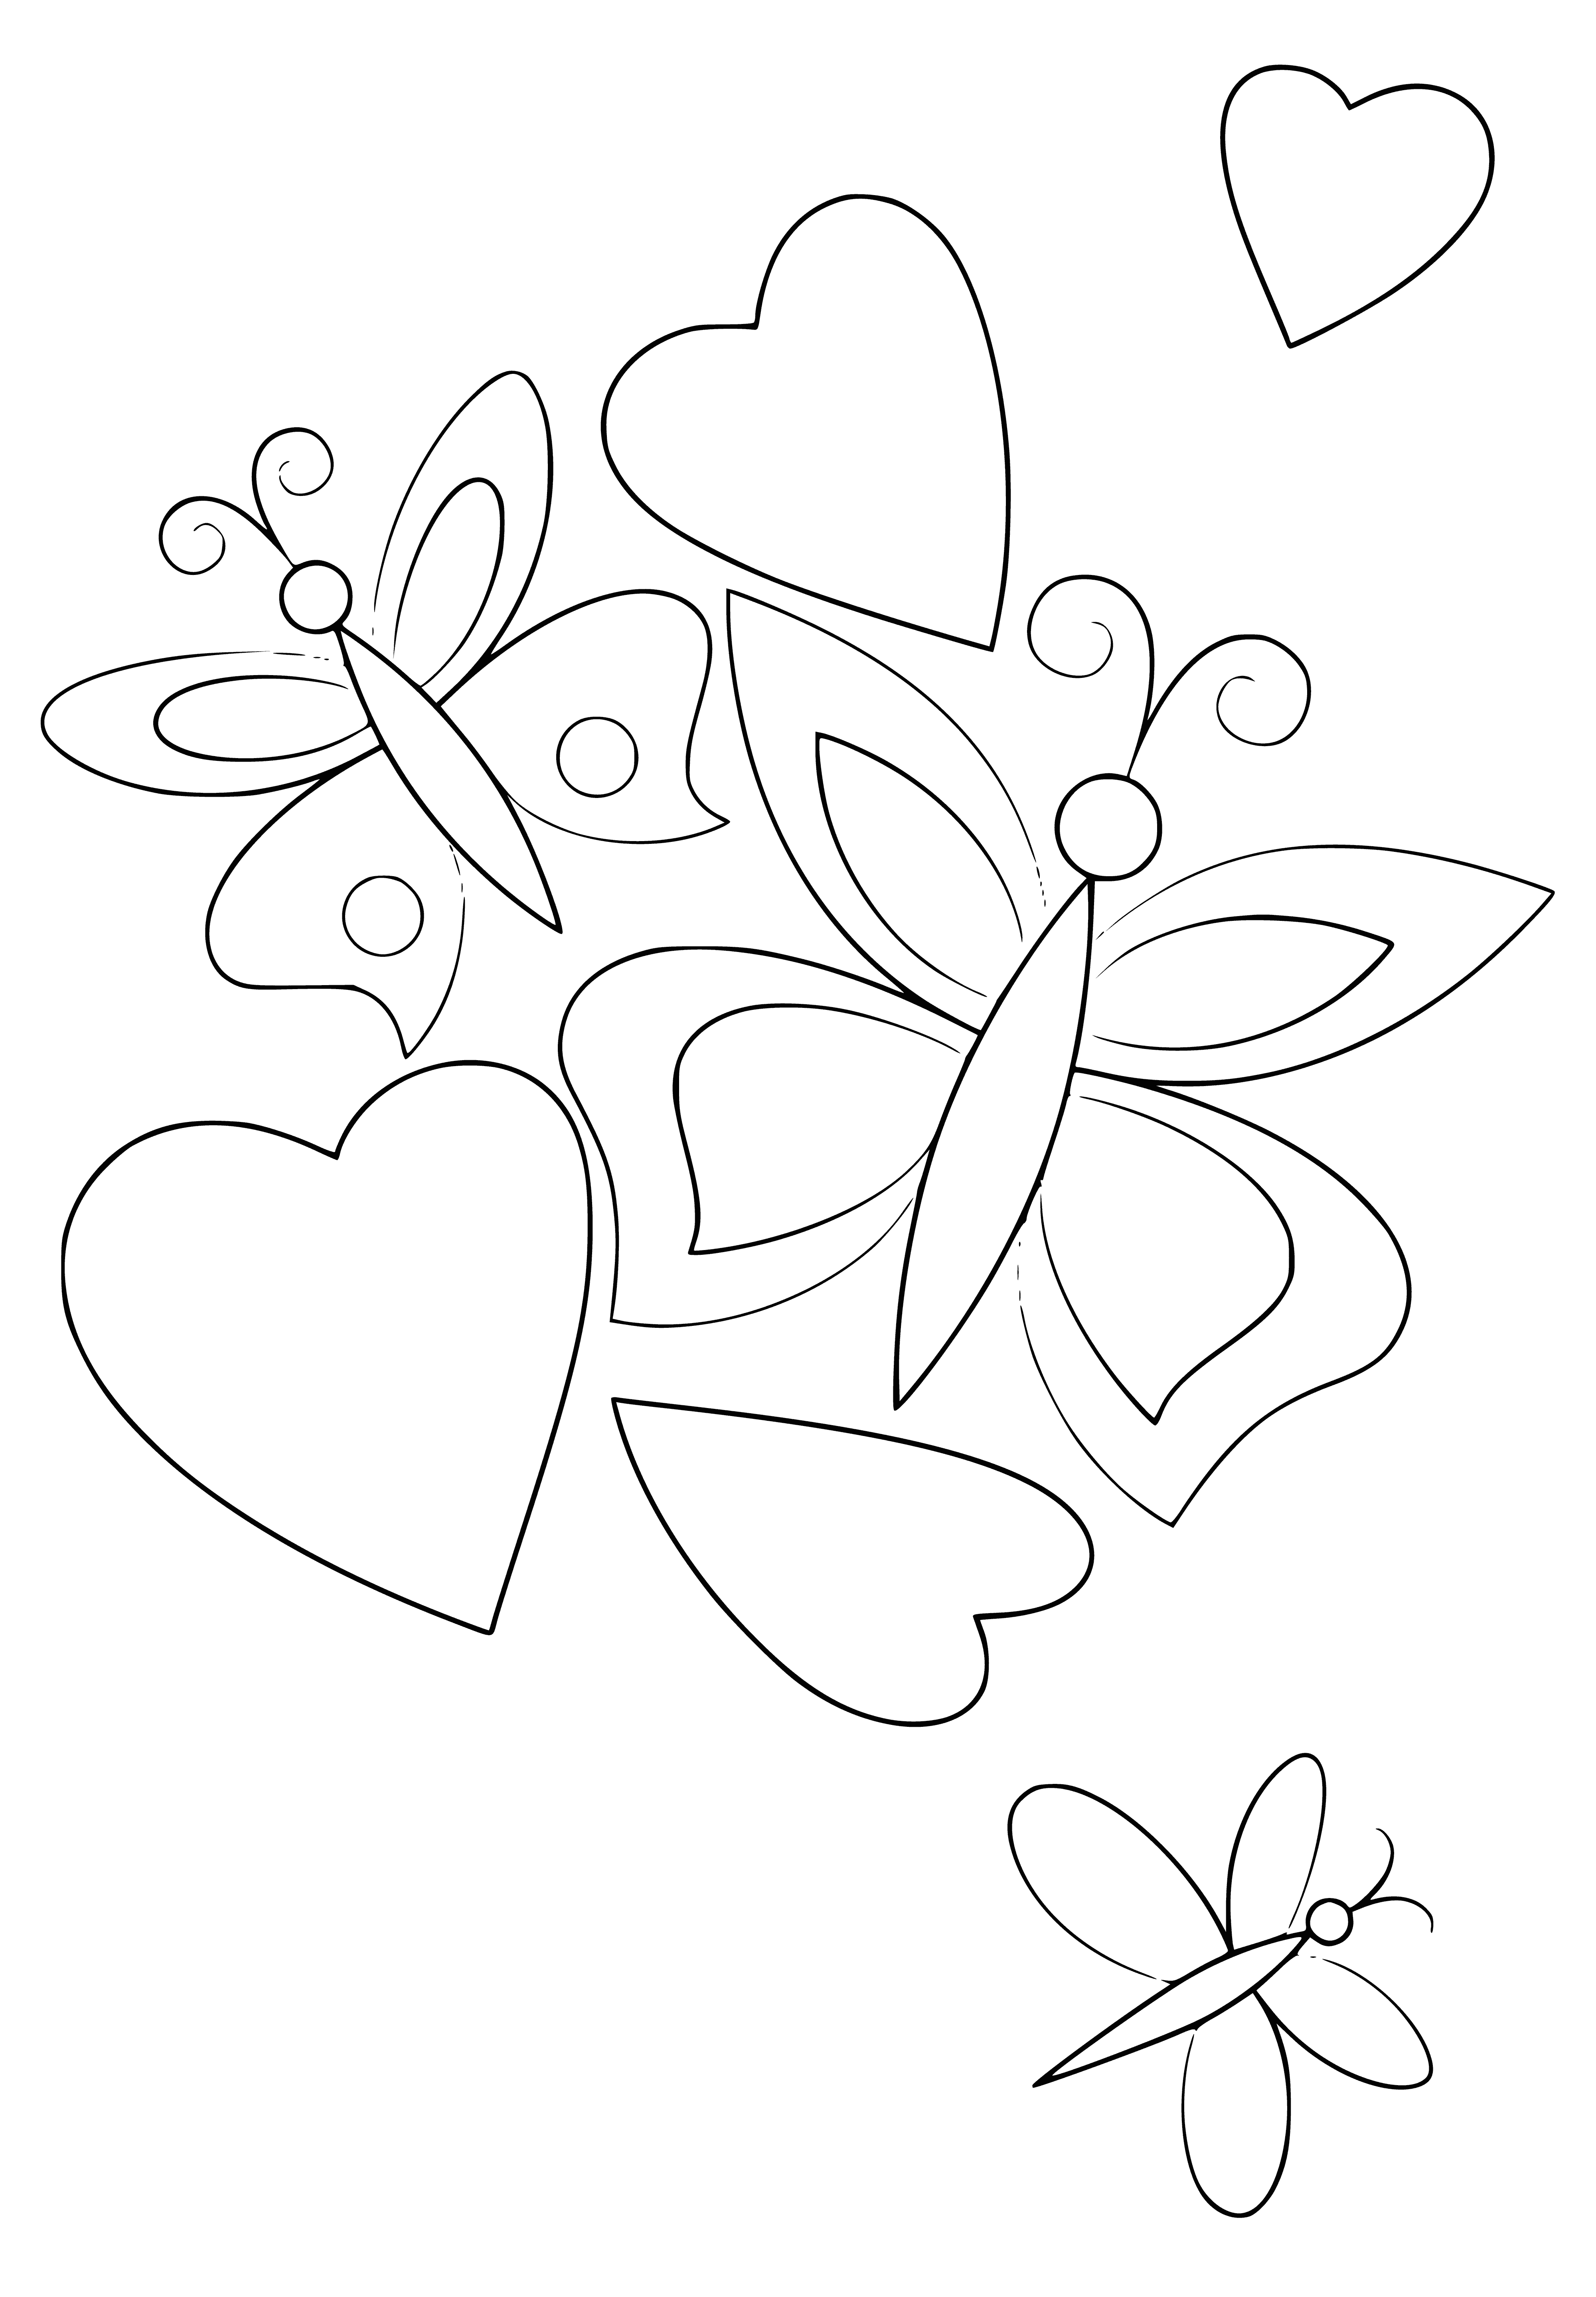 coloring page: Butterflies and heart over white background creates beautiful coloring page of love. #valentinesday #love